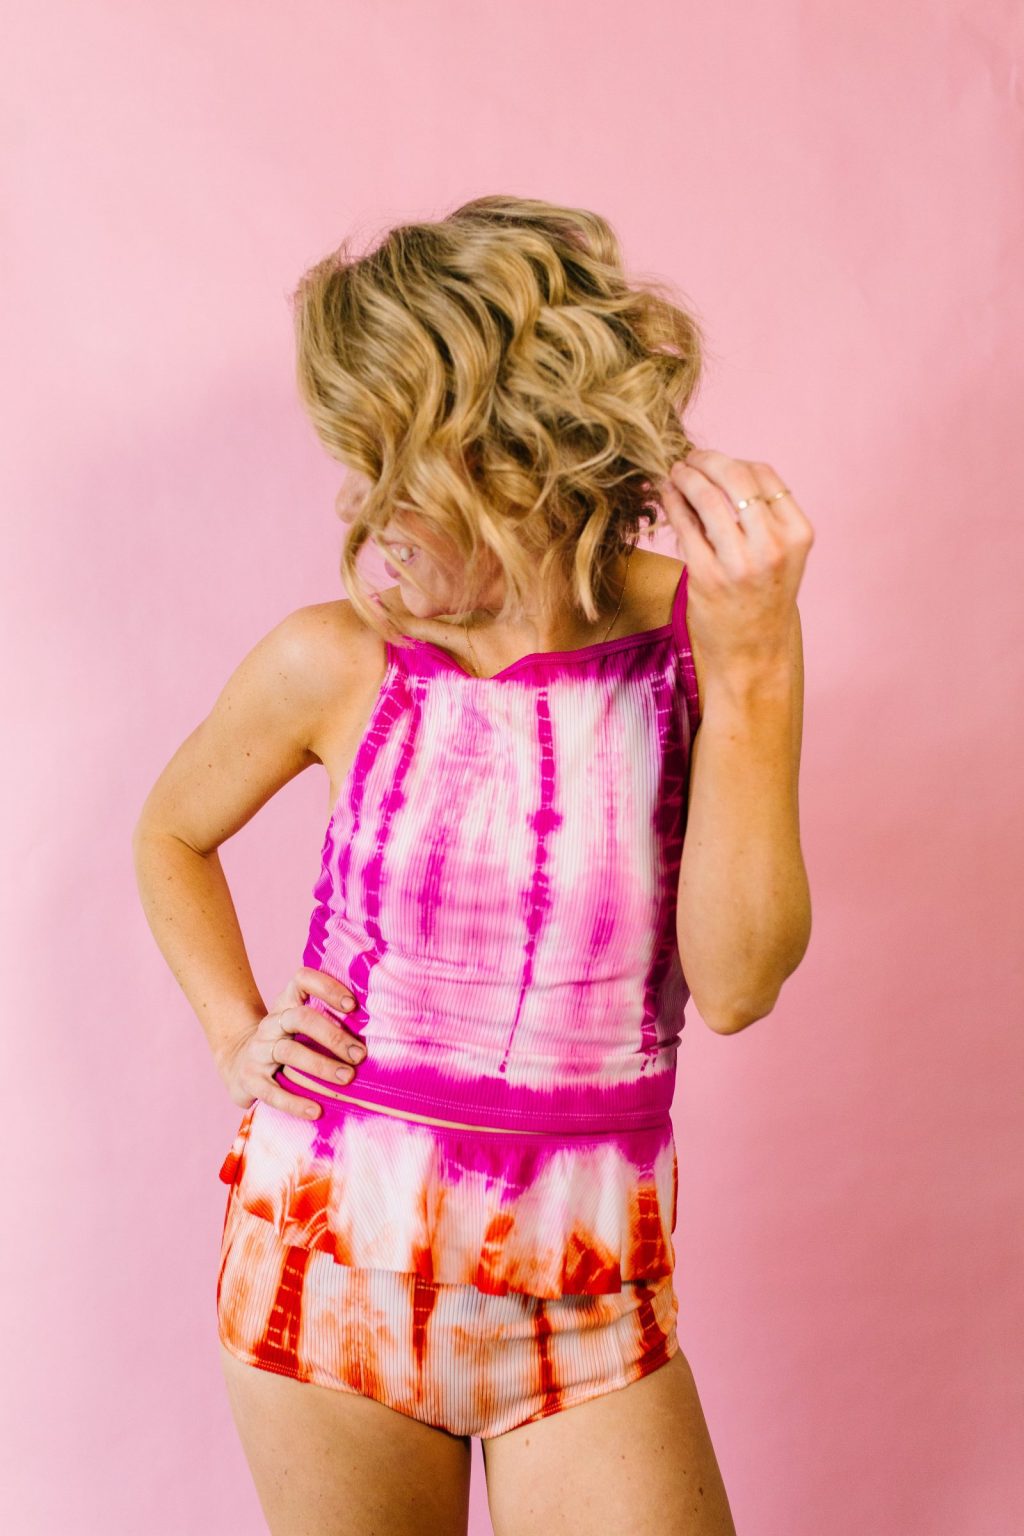 20 Ideas For Customizing Your Summer Fashion